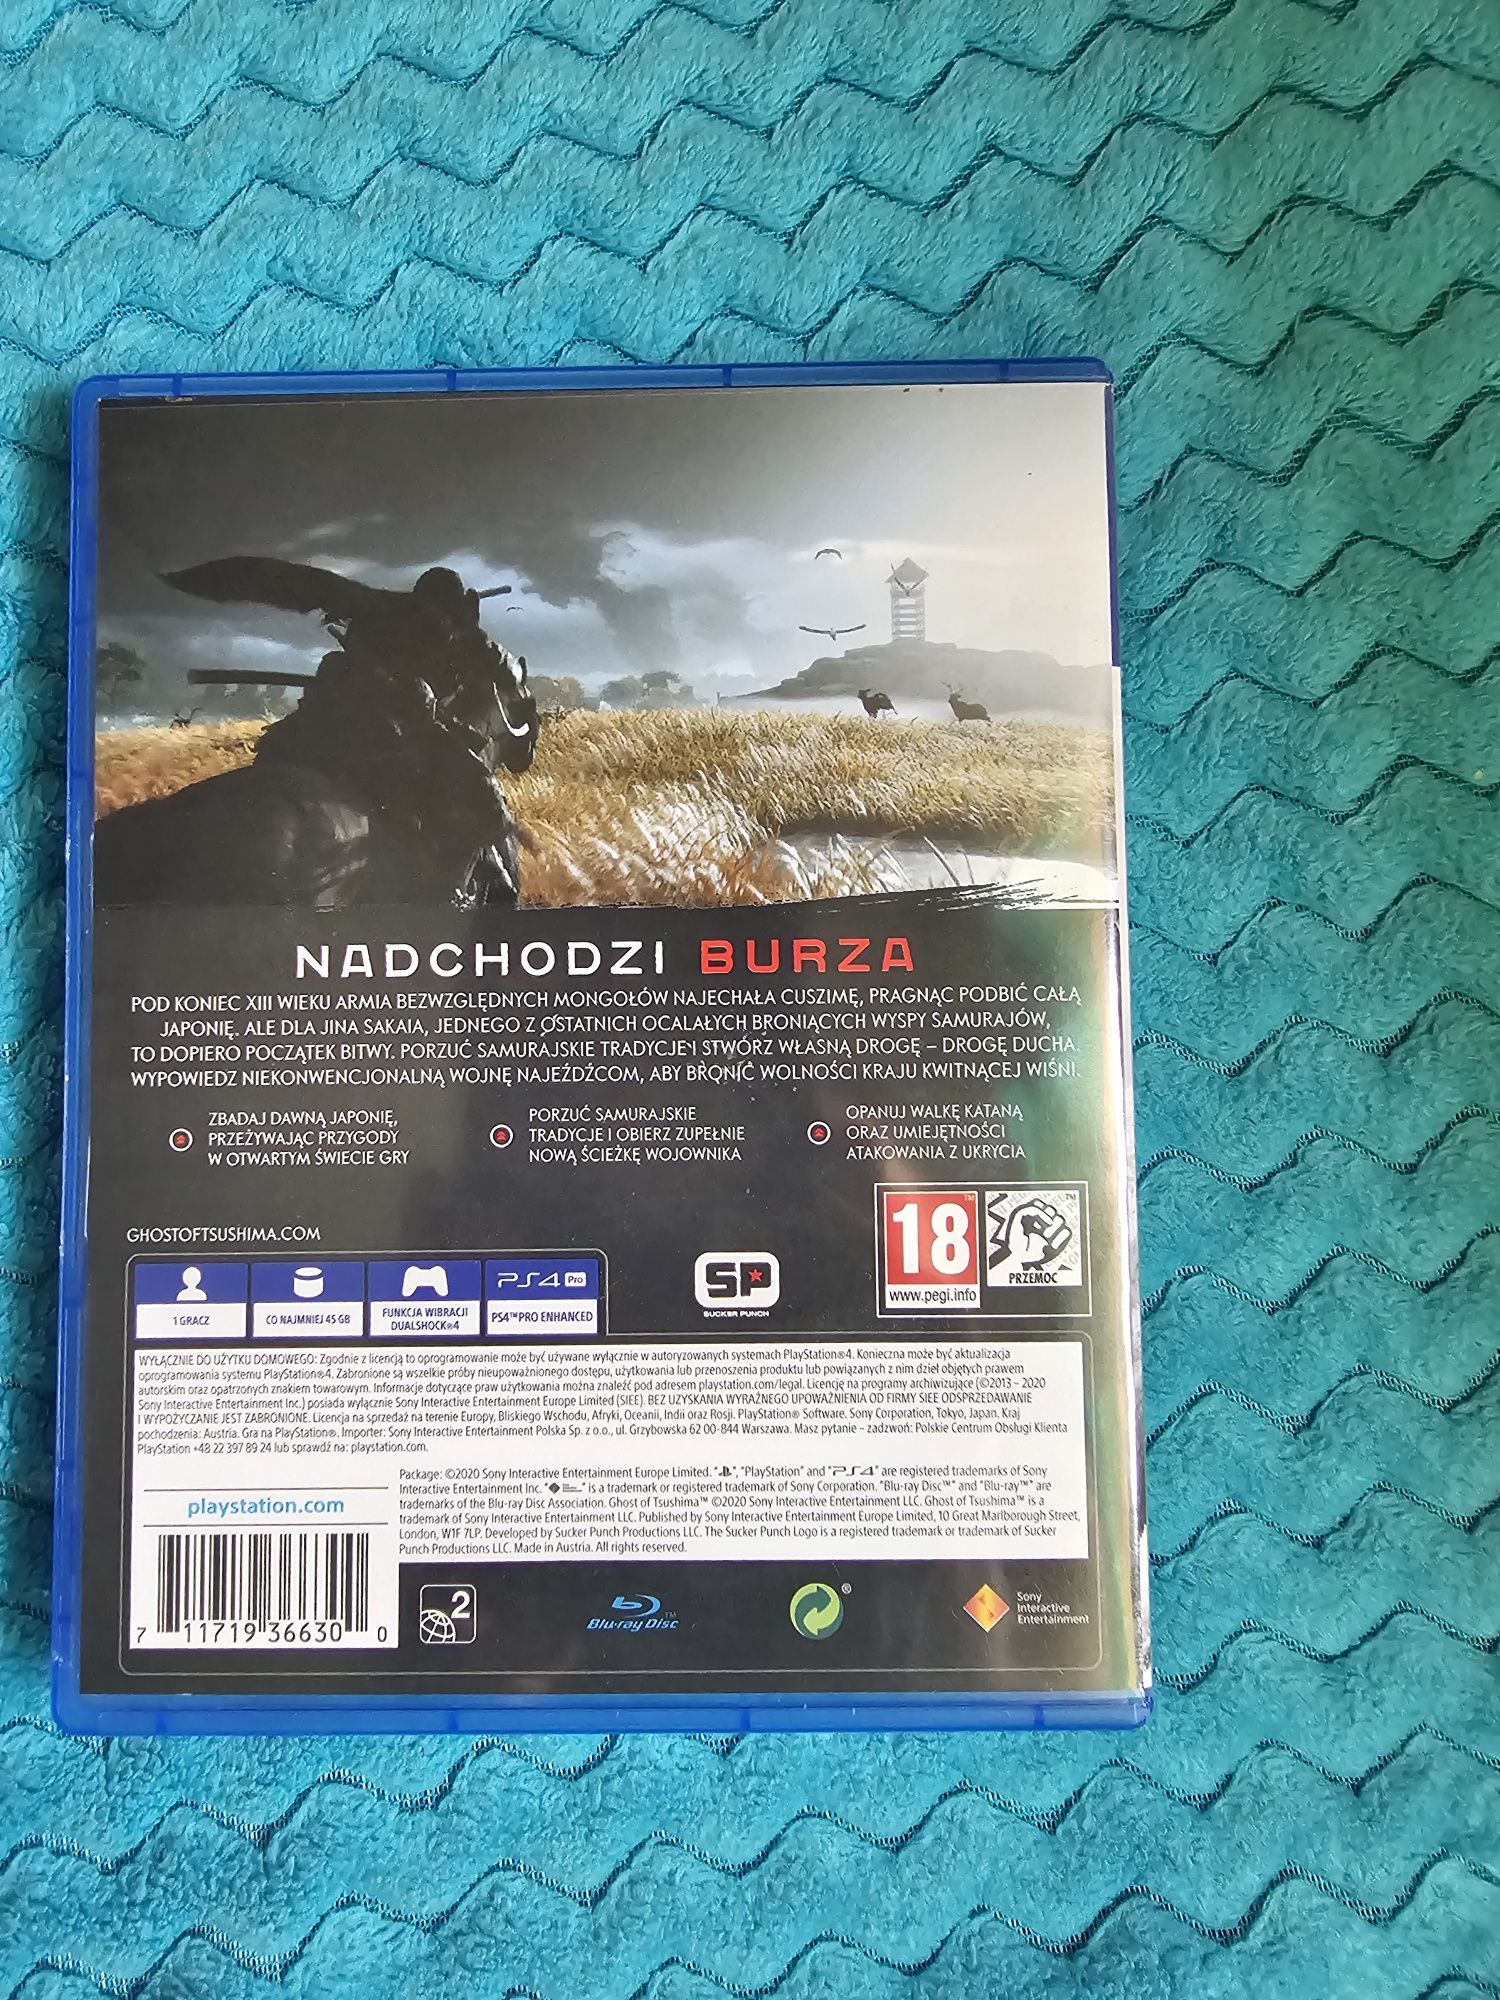 Ghost of Tsushima ps4/ps5